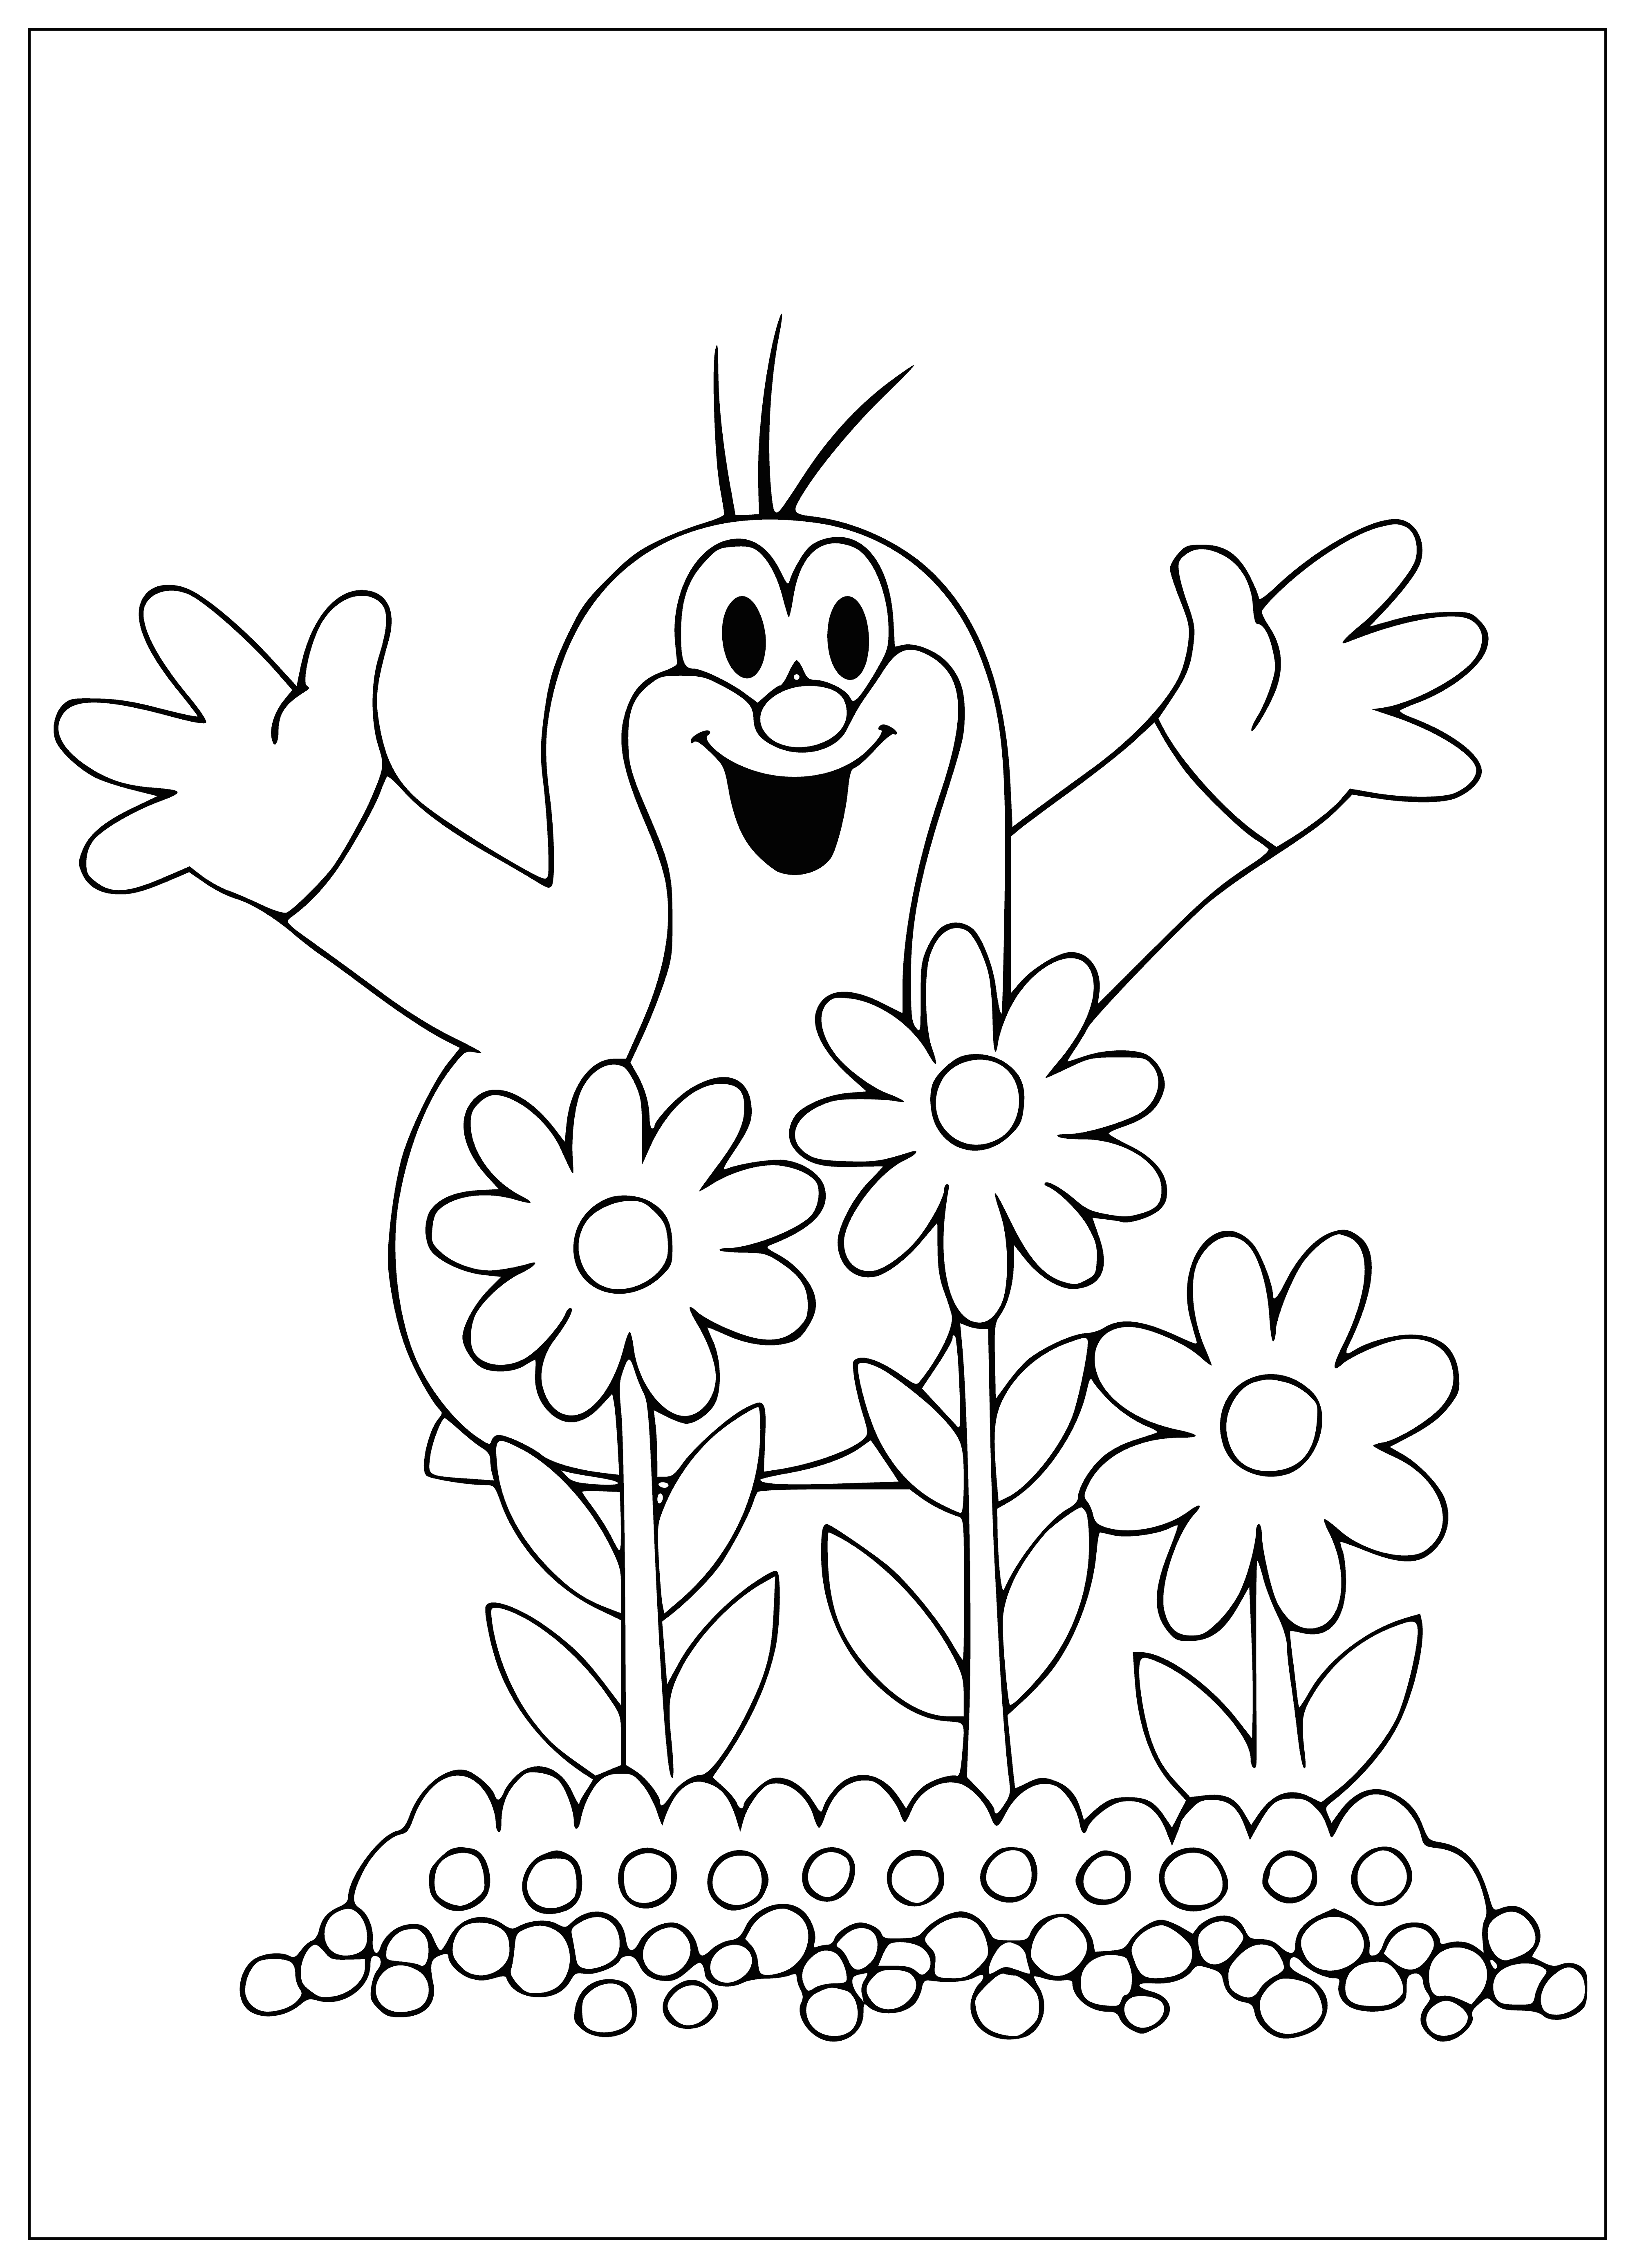 Mole and flowers coloring page